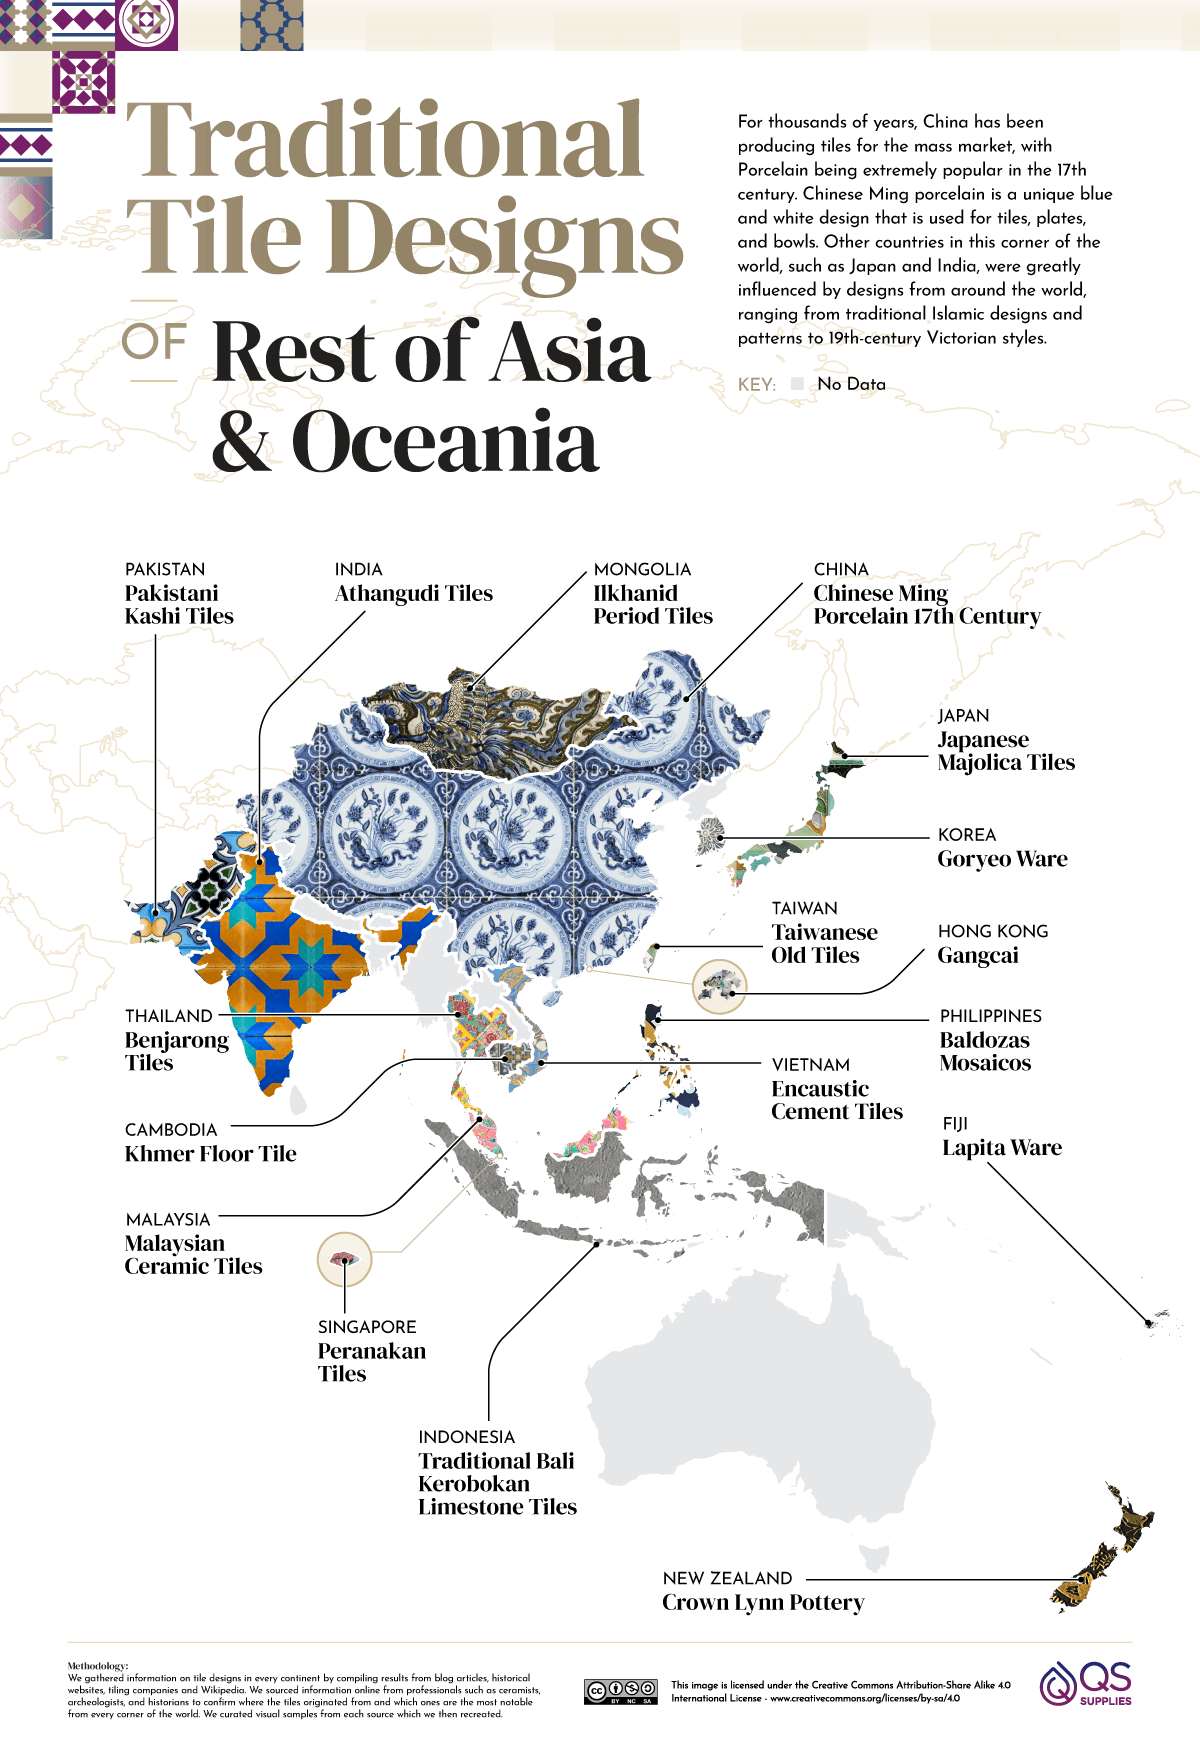 Traditional Tile Designs of Rest of Asia & Oceania